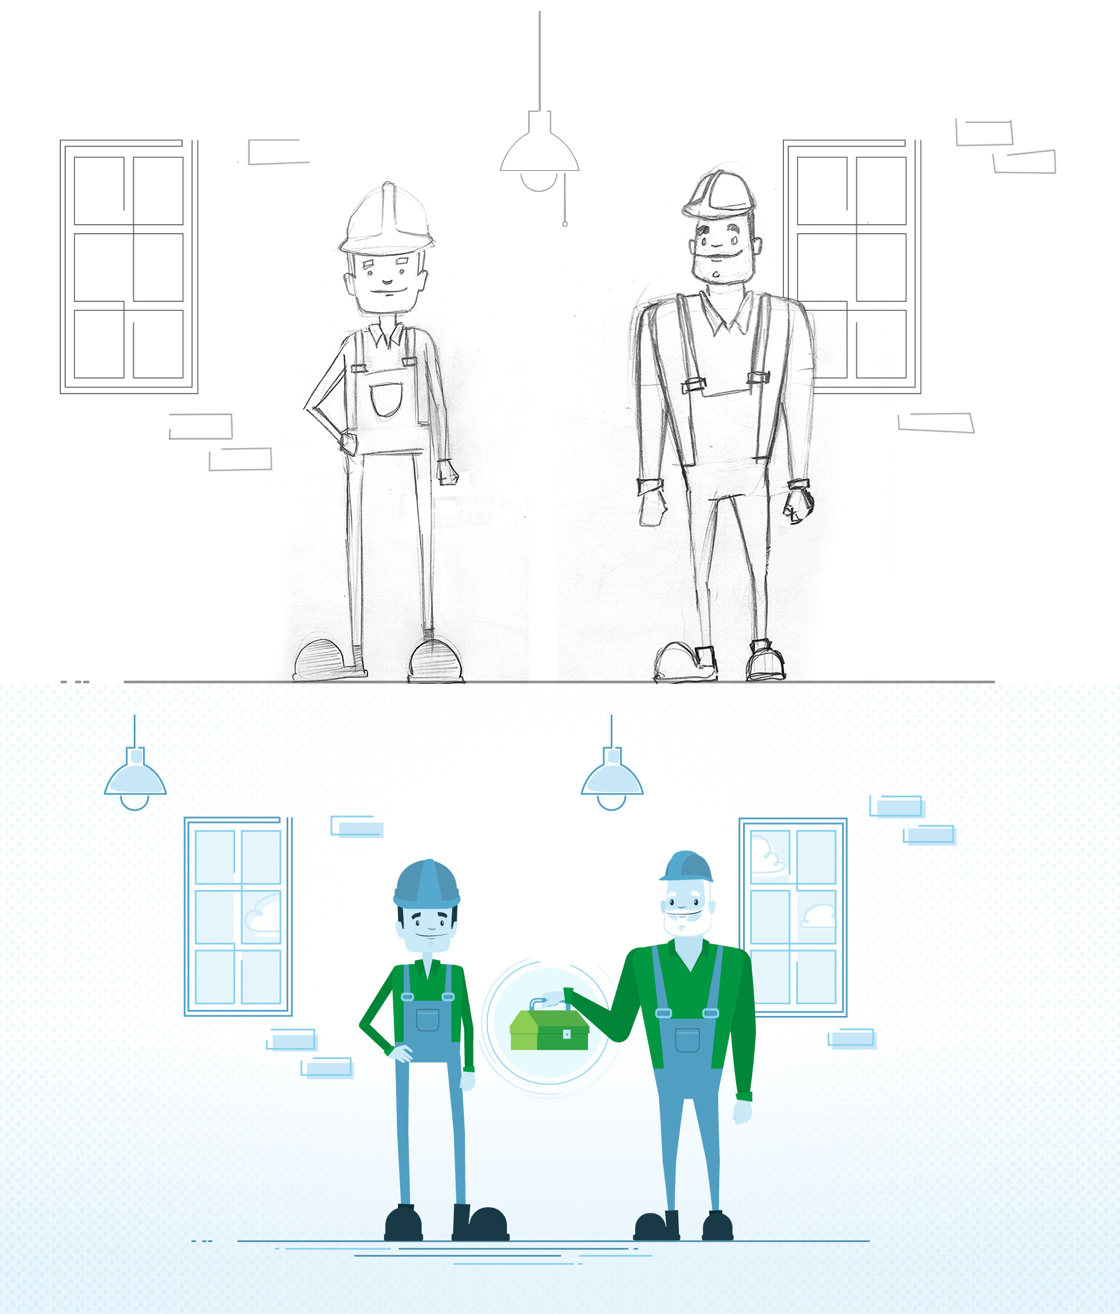 Sketch and illustration from the motion design video for EnviroCompétences